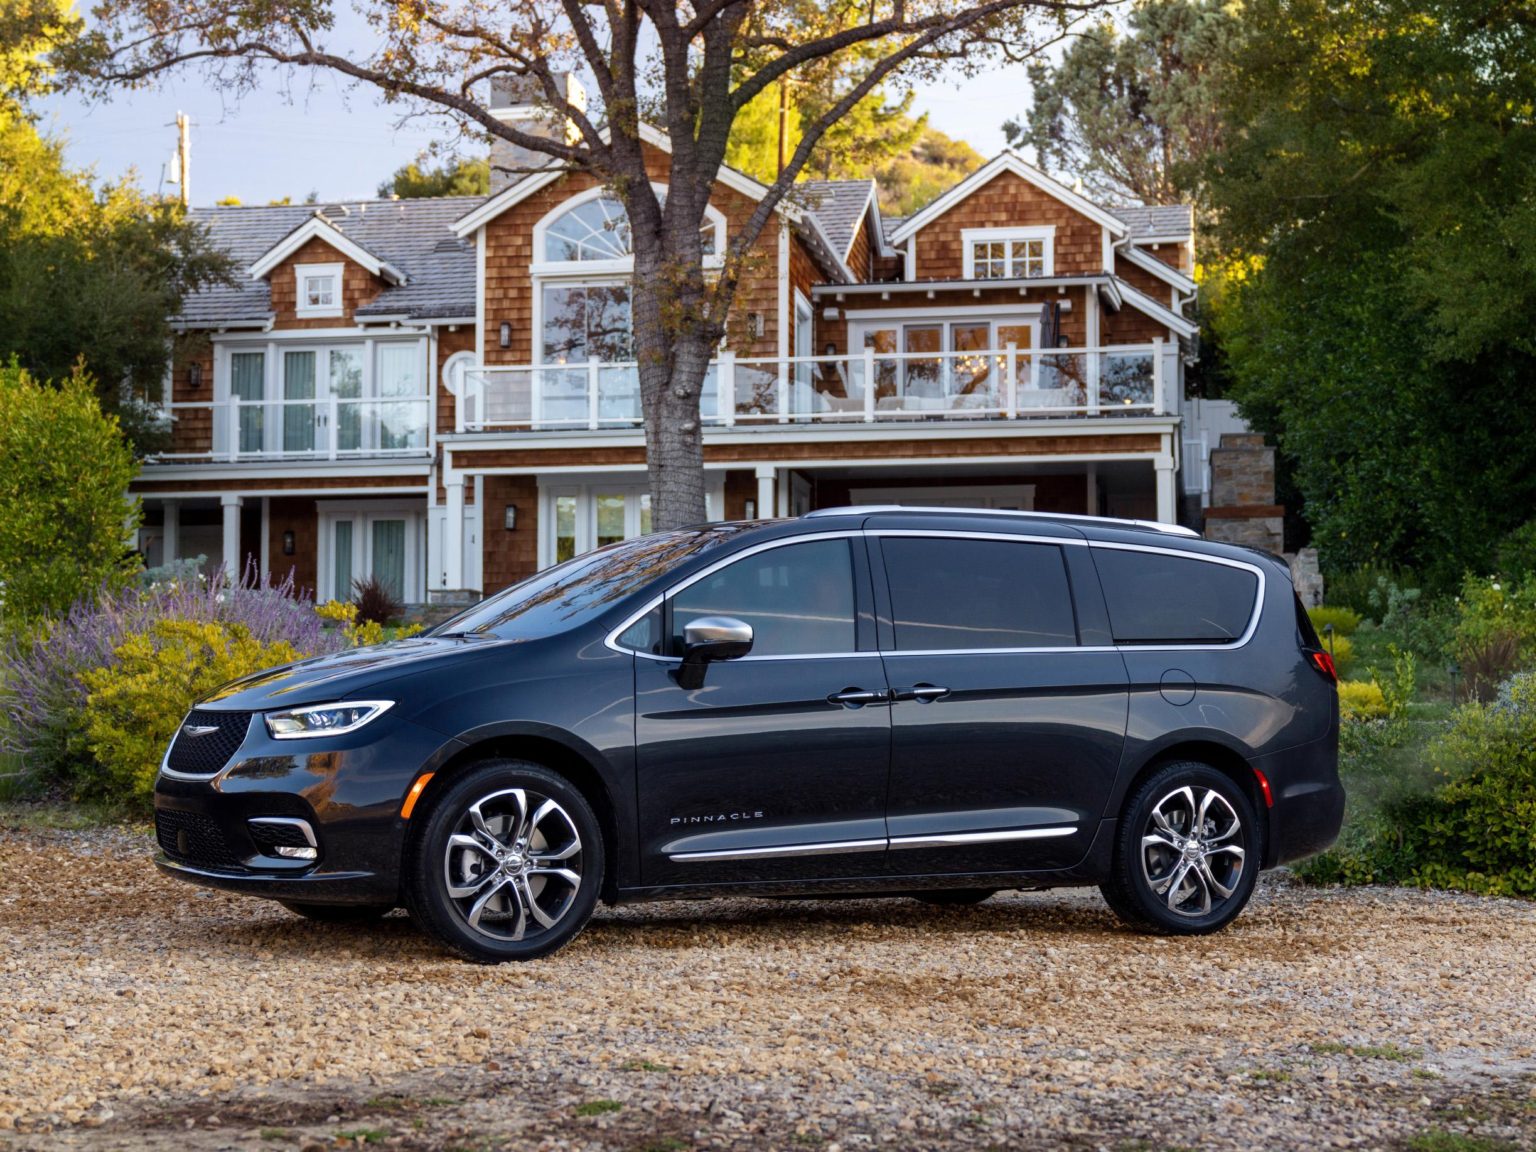 Chrysler introduced the Pacifica Pinnacle to its lineup for the 2021 model year.